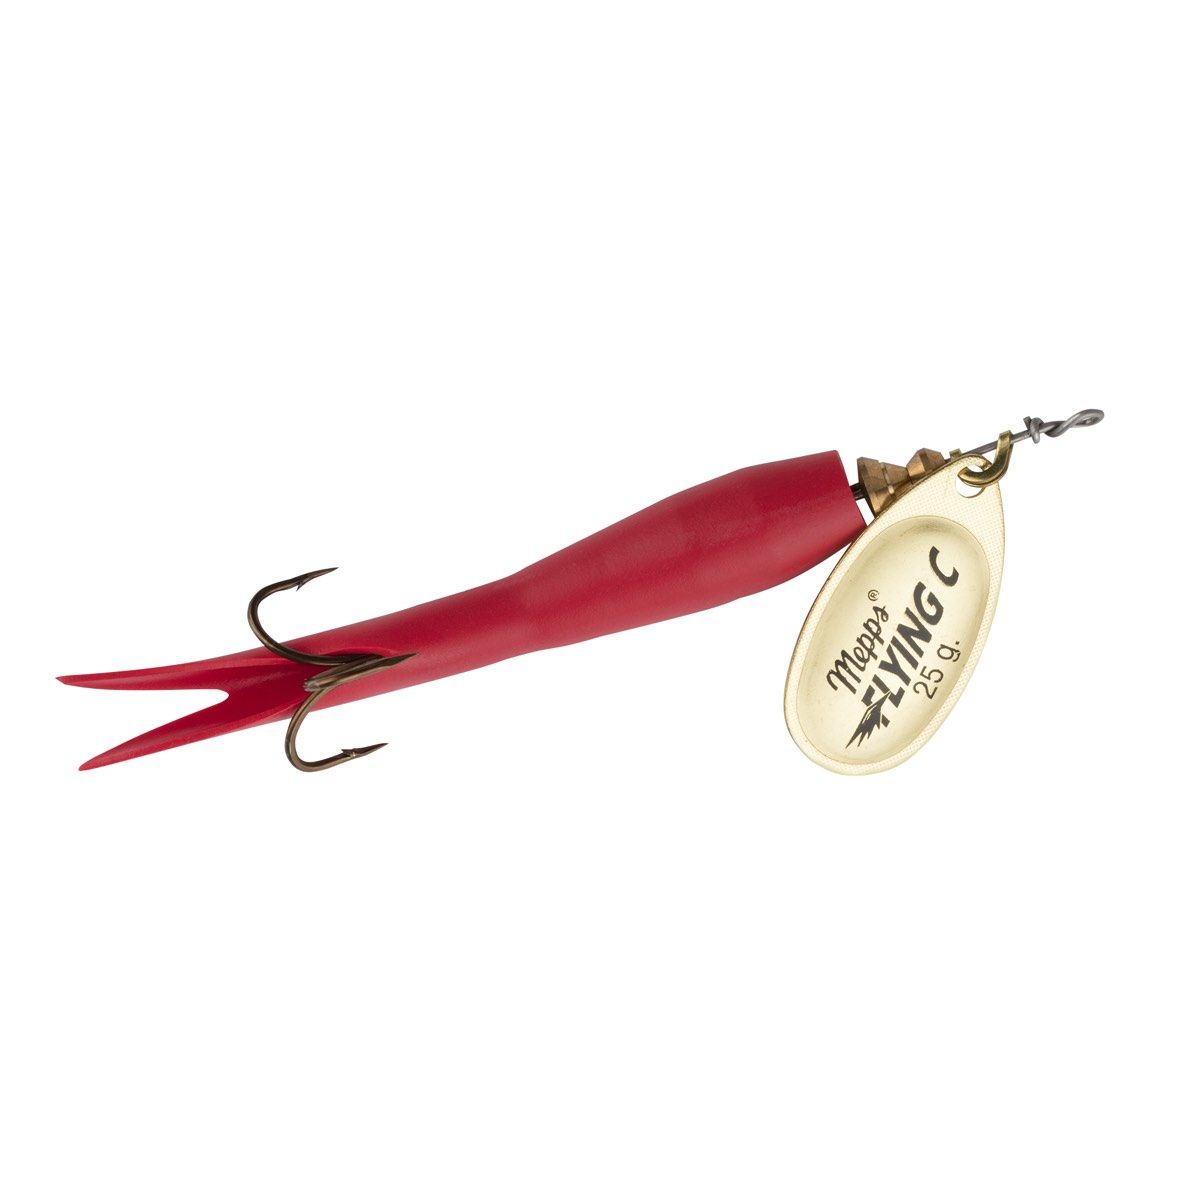 Mepps Aglia Flying C Silver/Chartreuse spinner Mepps Aglia Flying